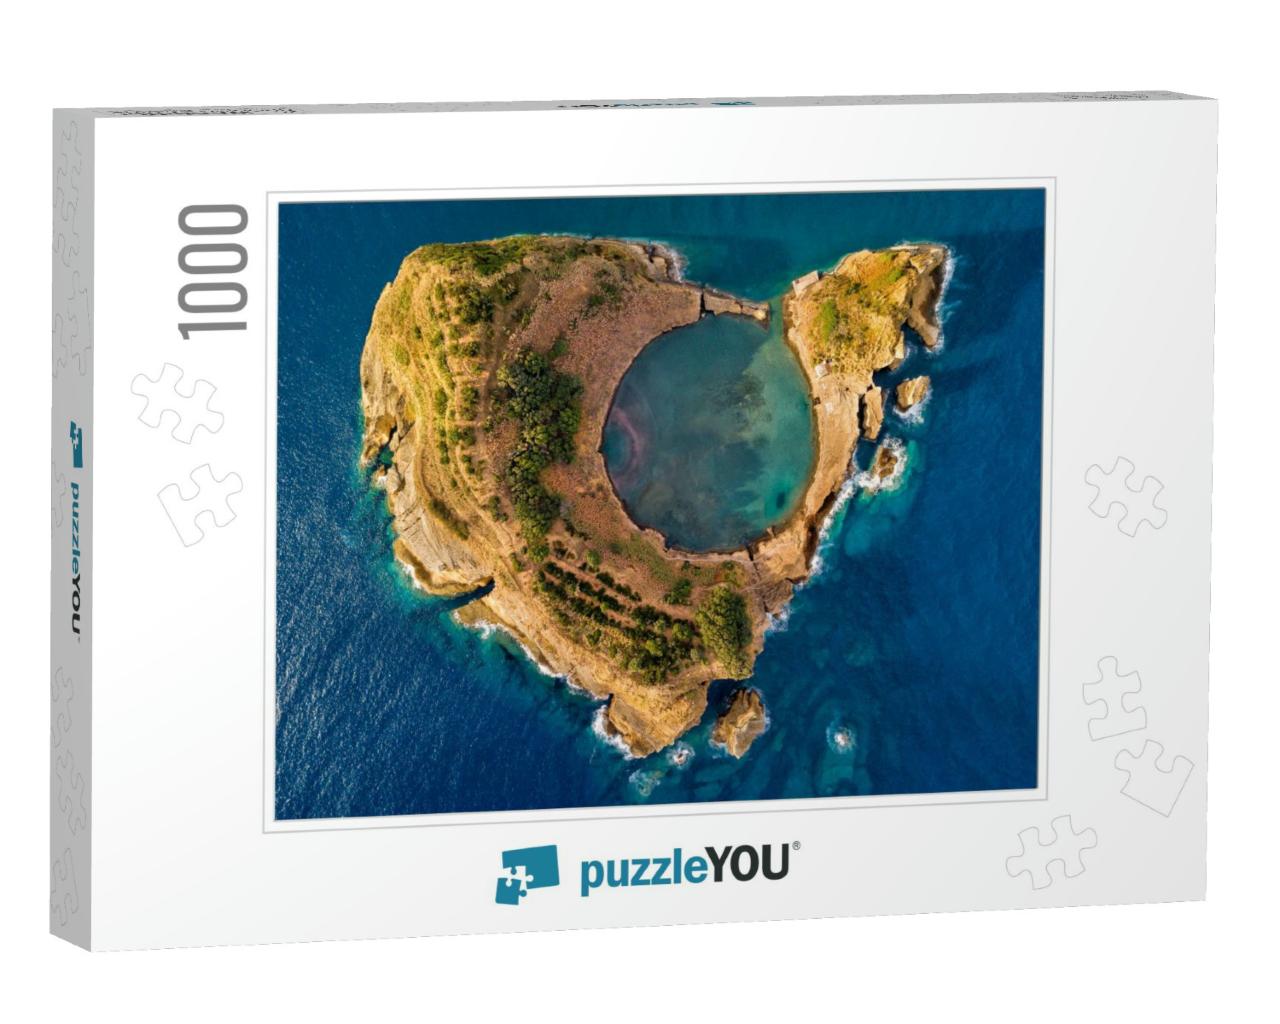 Top View of Islet of Vila Franca Do Campo is Formed by th... Jigsaw Puzzle with 1000 pieces